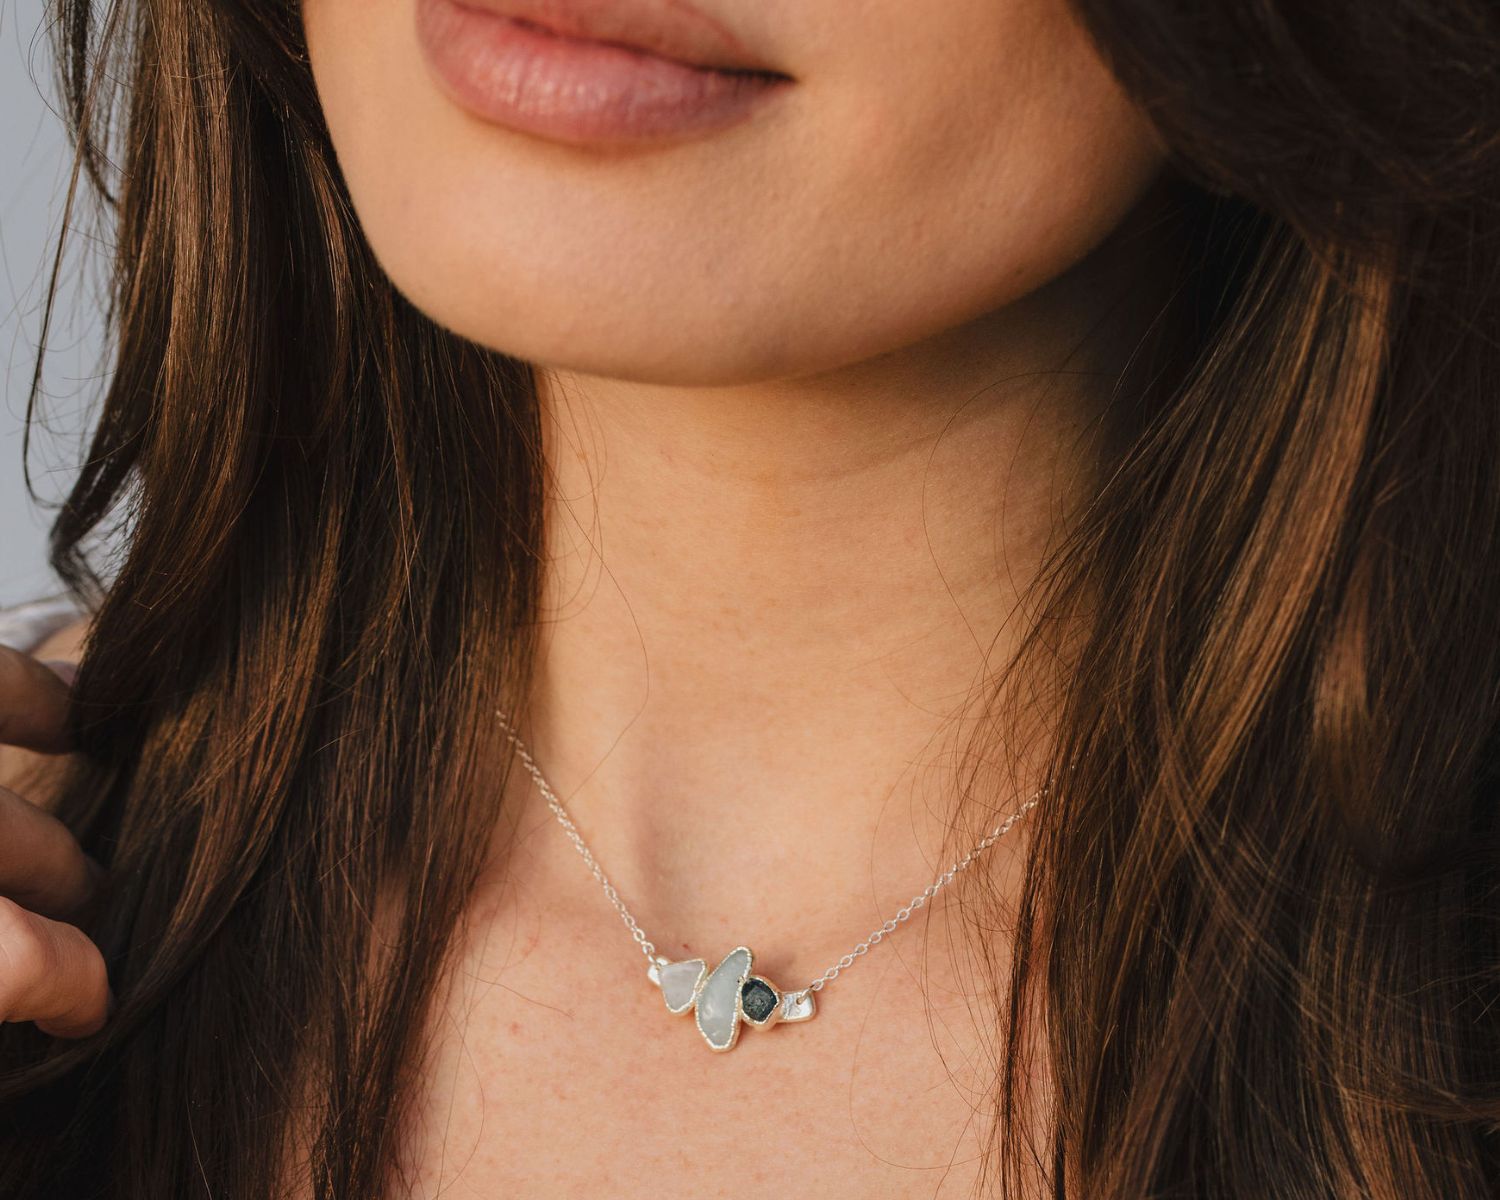 Birthstone Bud Duo Necklace, 2 stone mothers necklace